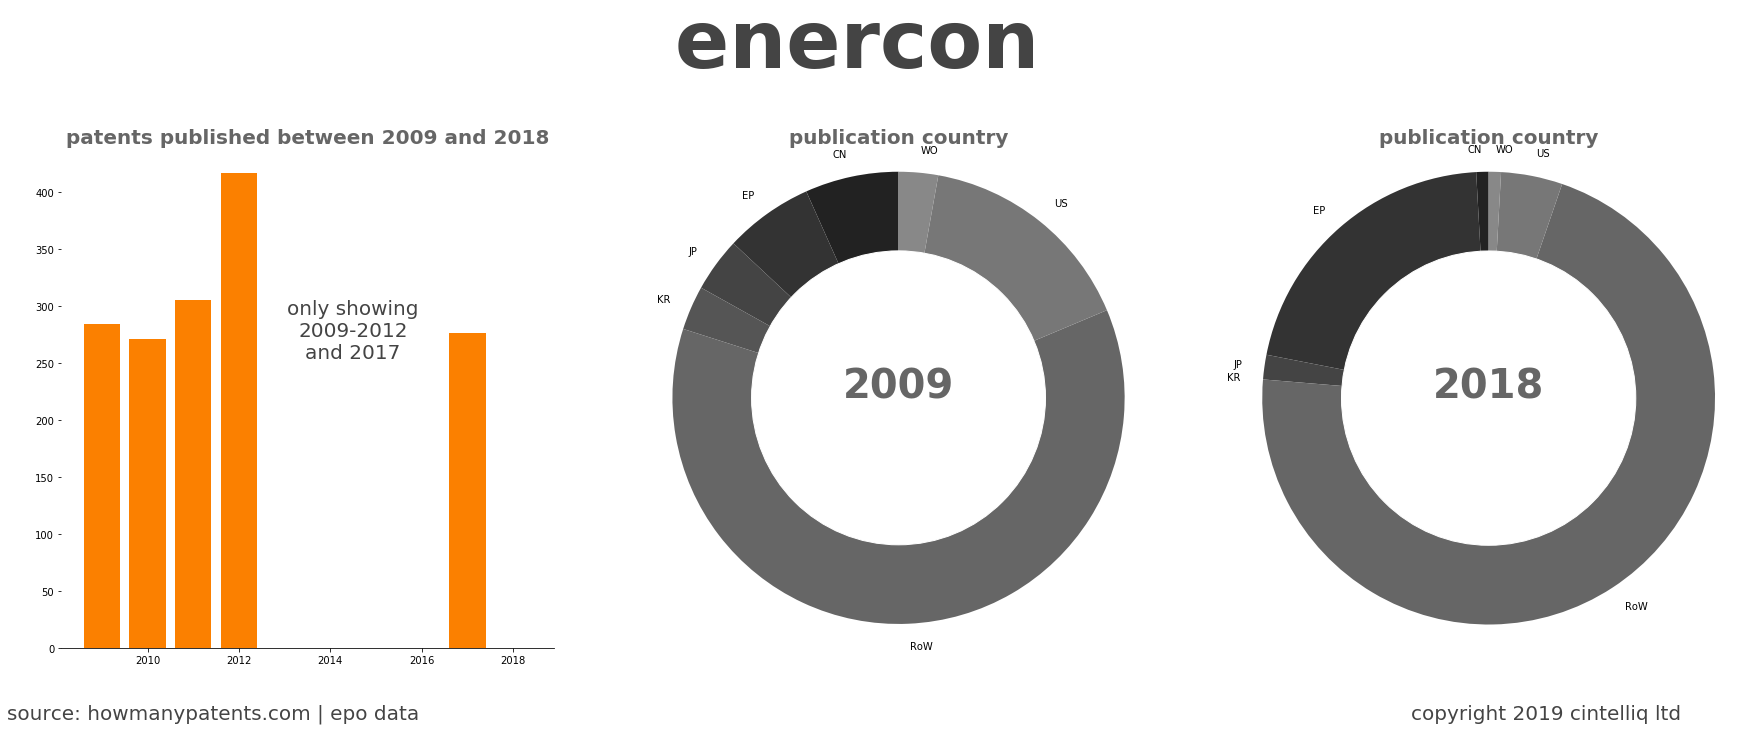 summary of patents for Enercon 